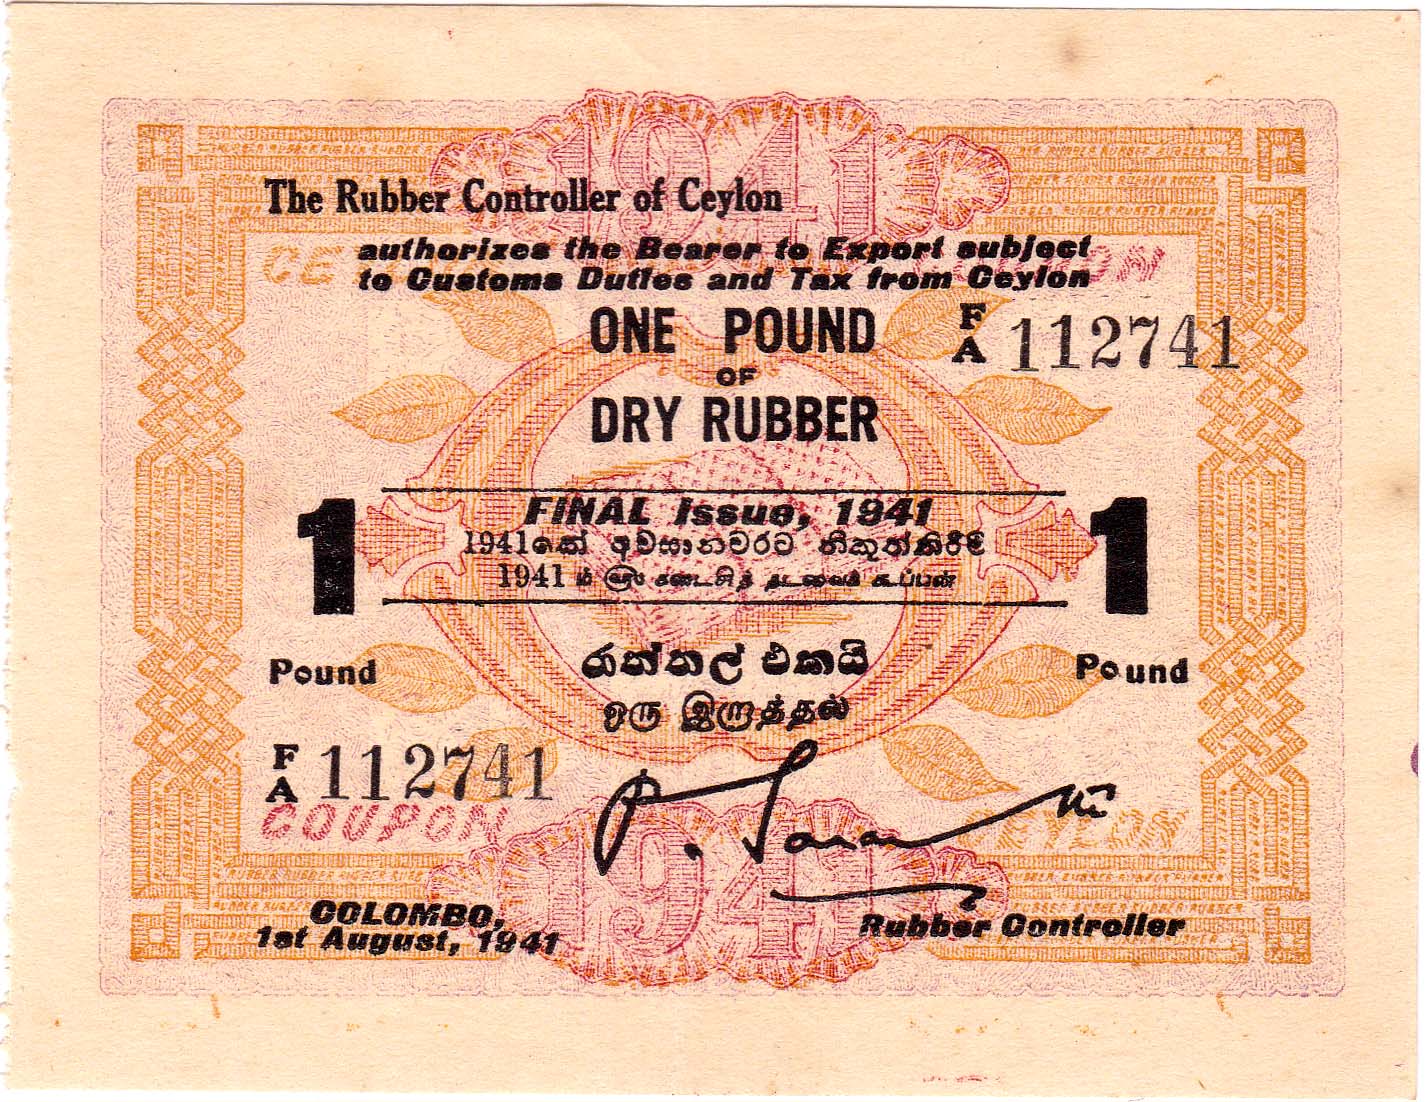 1941_fi_rubbercoupon_1lbs_front